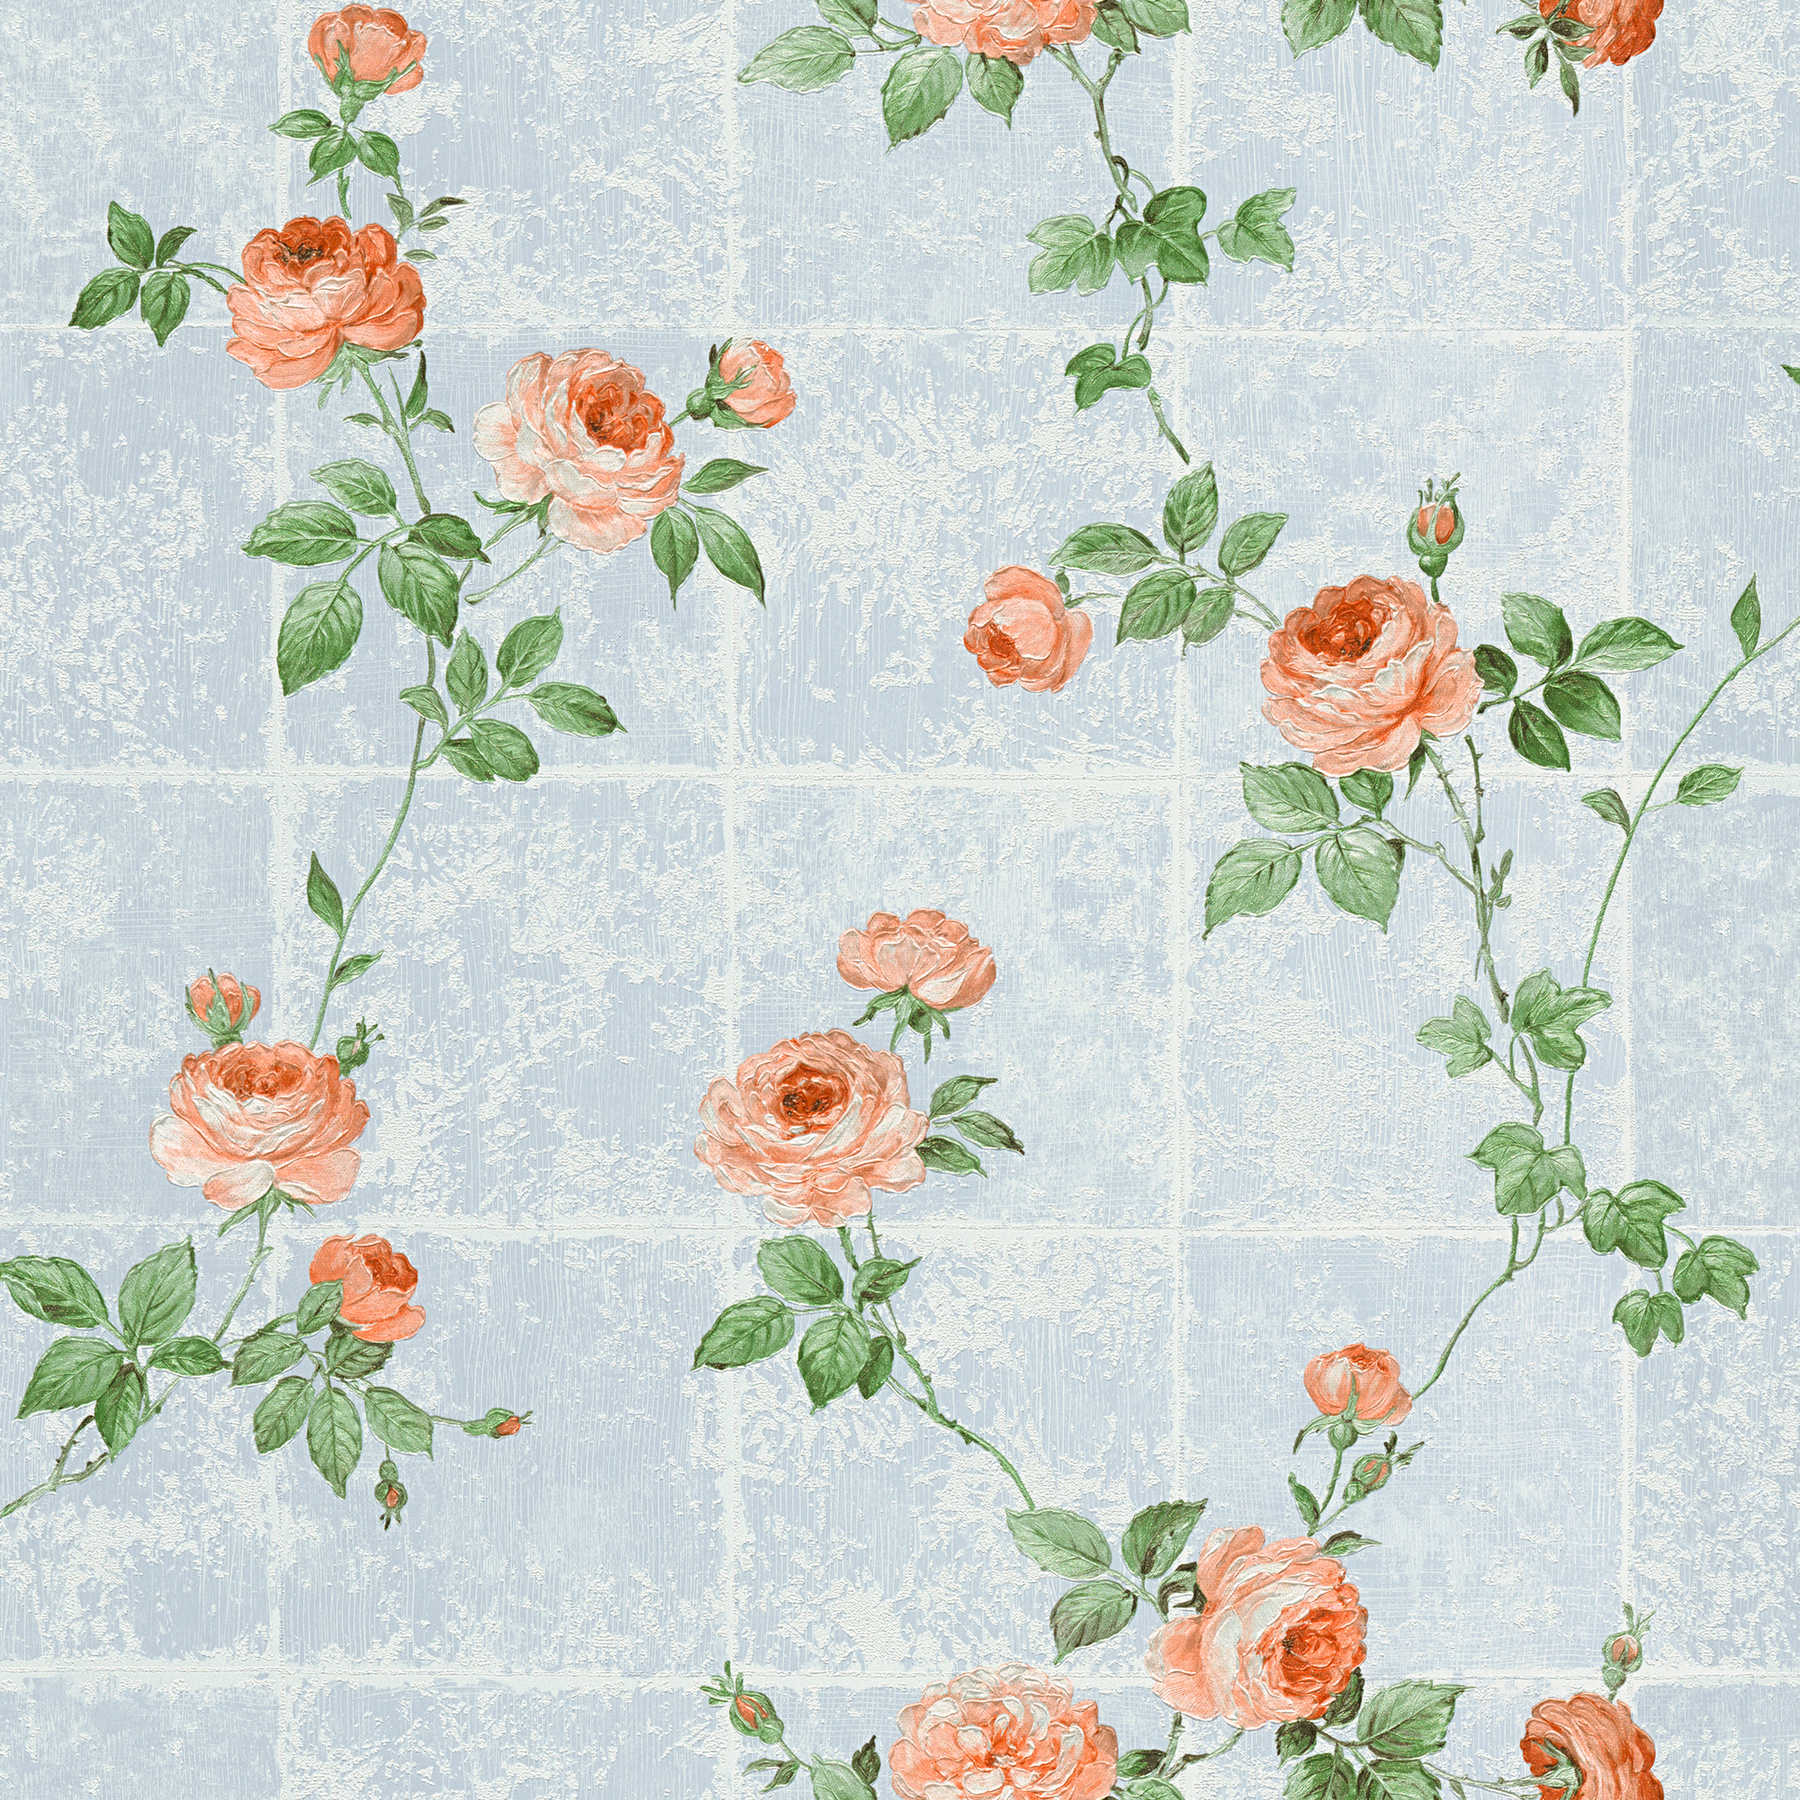 Tile look wallpaper in used loco with roses vines - blue
